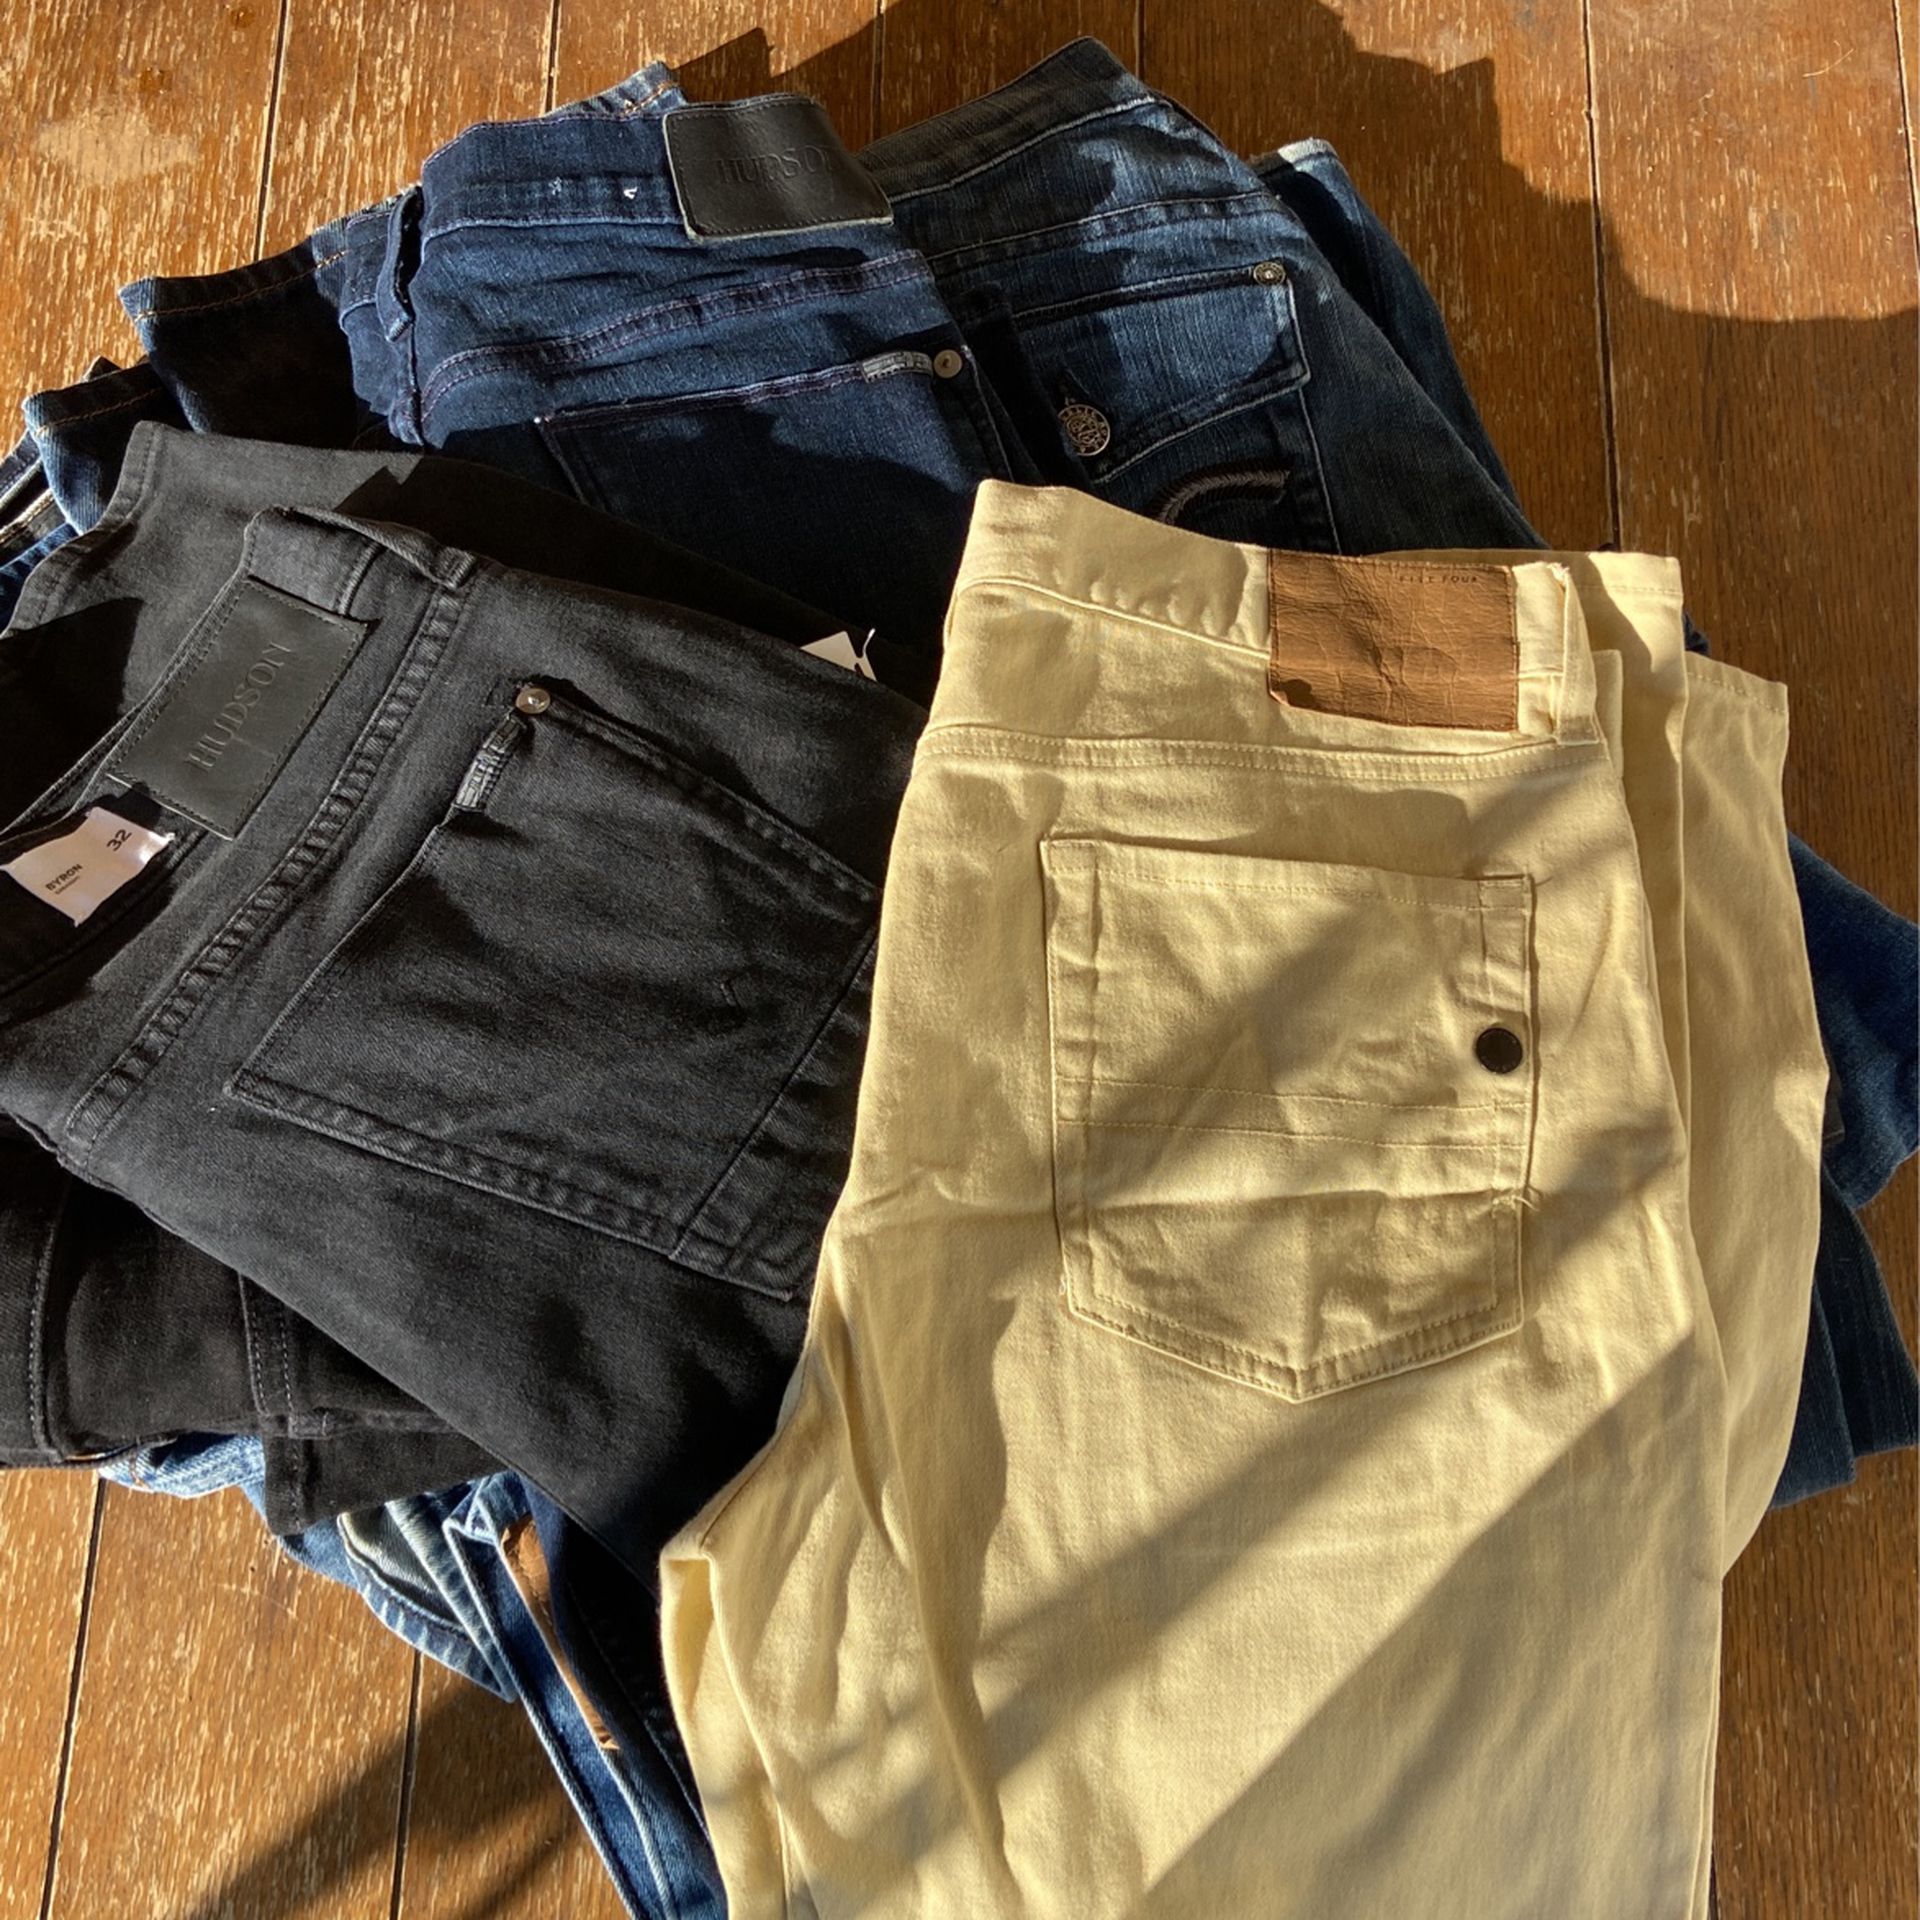 Hudson Seven Jeans About Pairs Sale in Phoenix, - OfferUp